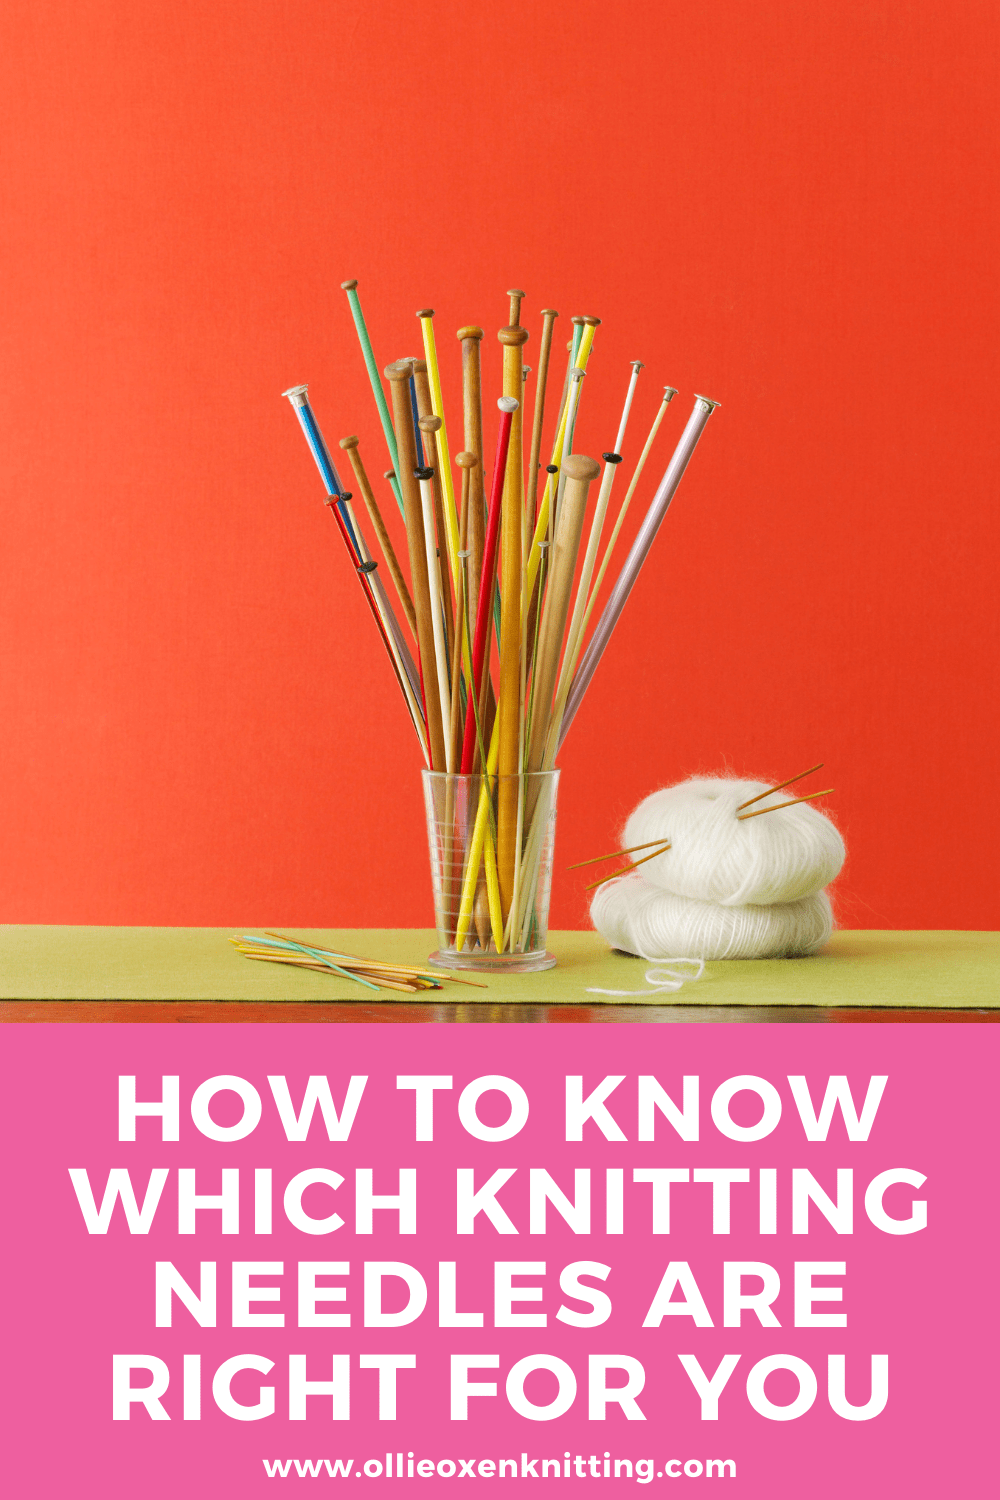 How To Know Which Knitting Needles Are Right For You | Ollie Oxen Knitting